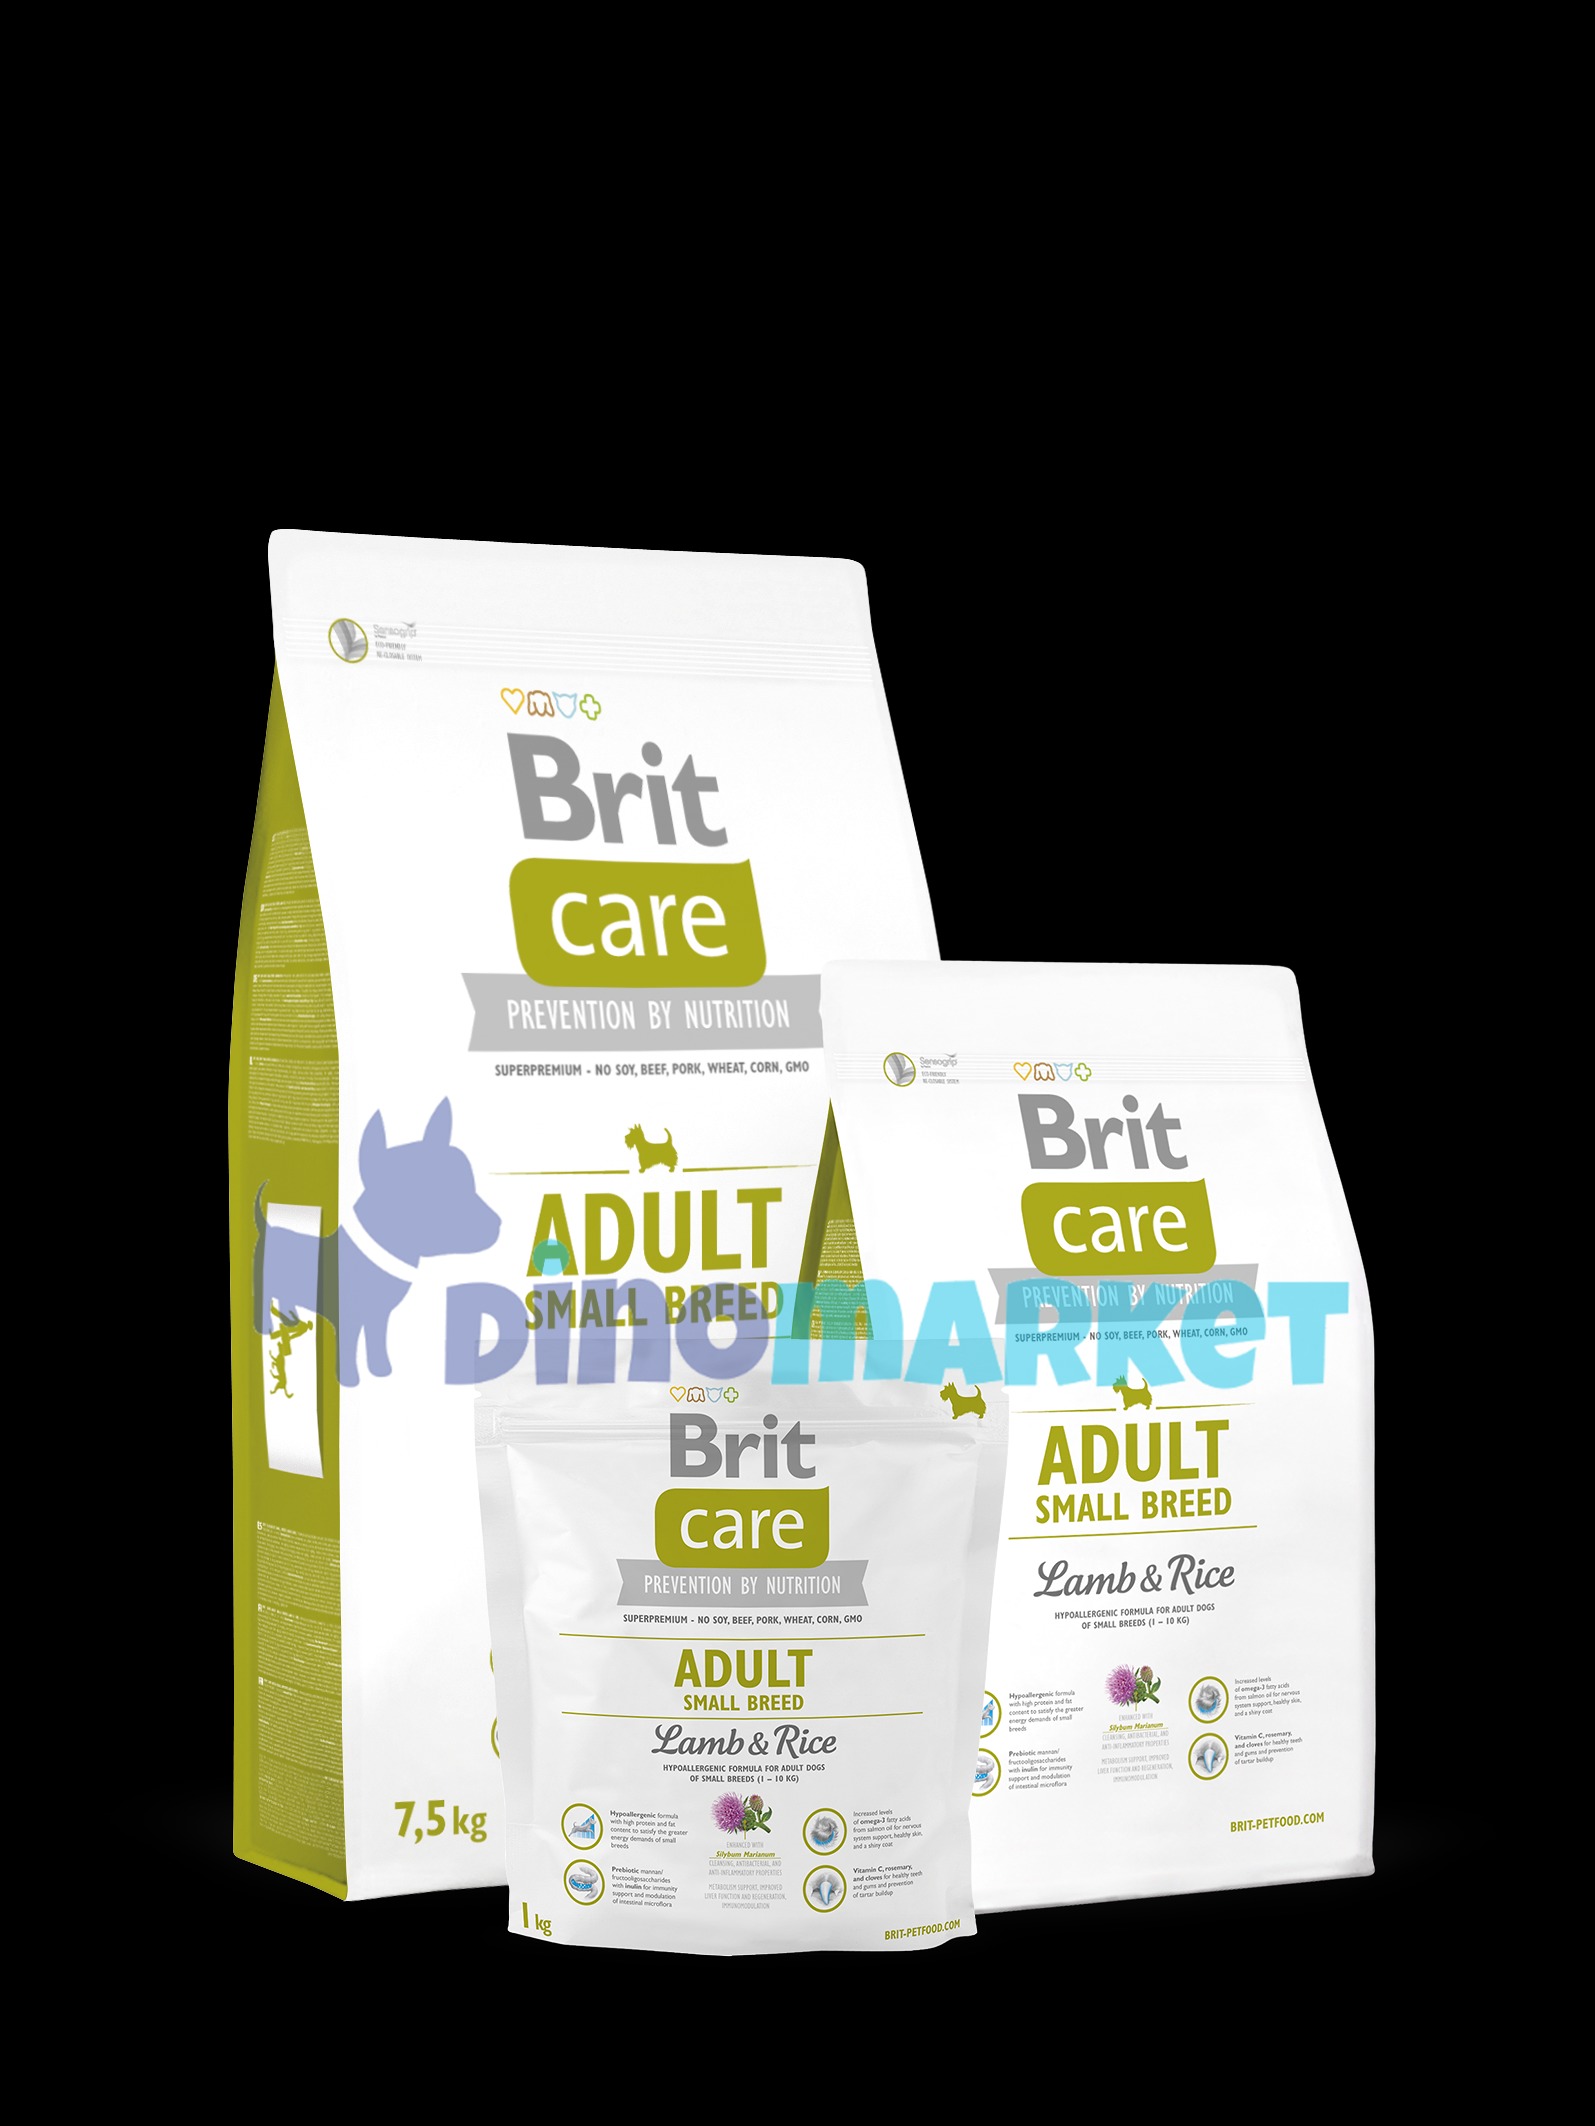 Brit Care Dog Adult Small Breed Lamb & Rice 1kg